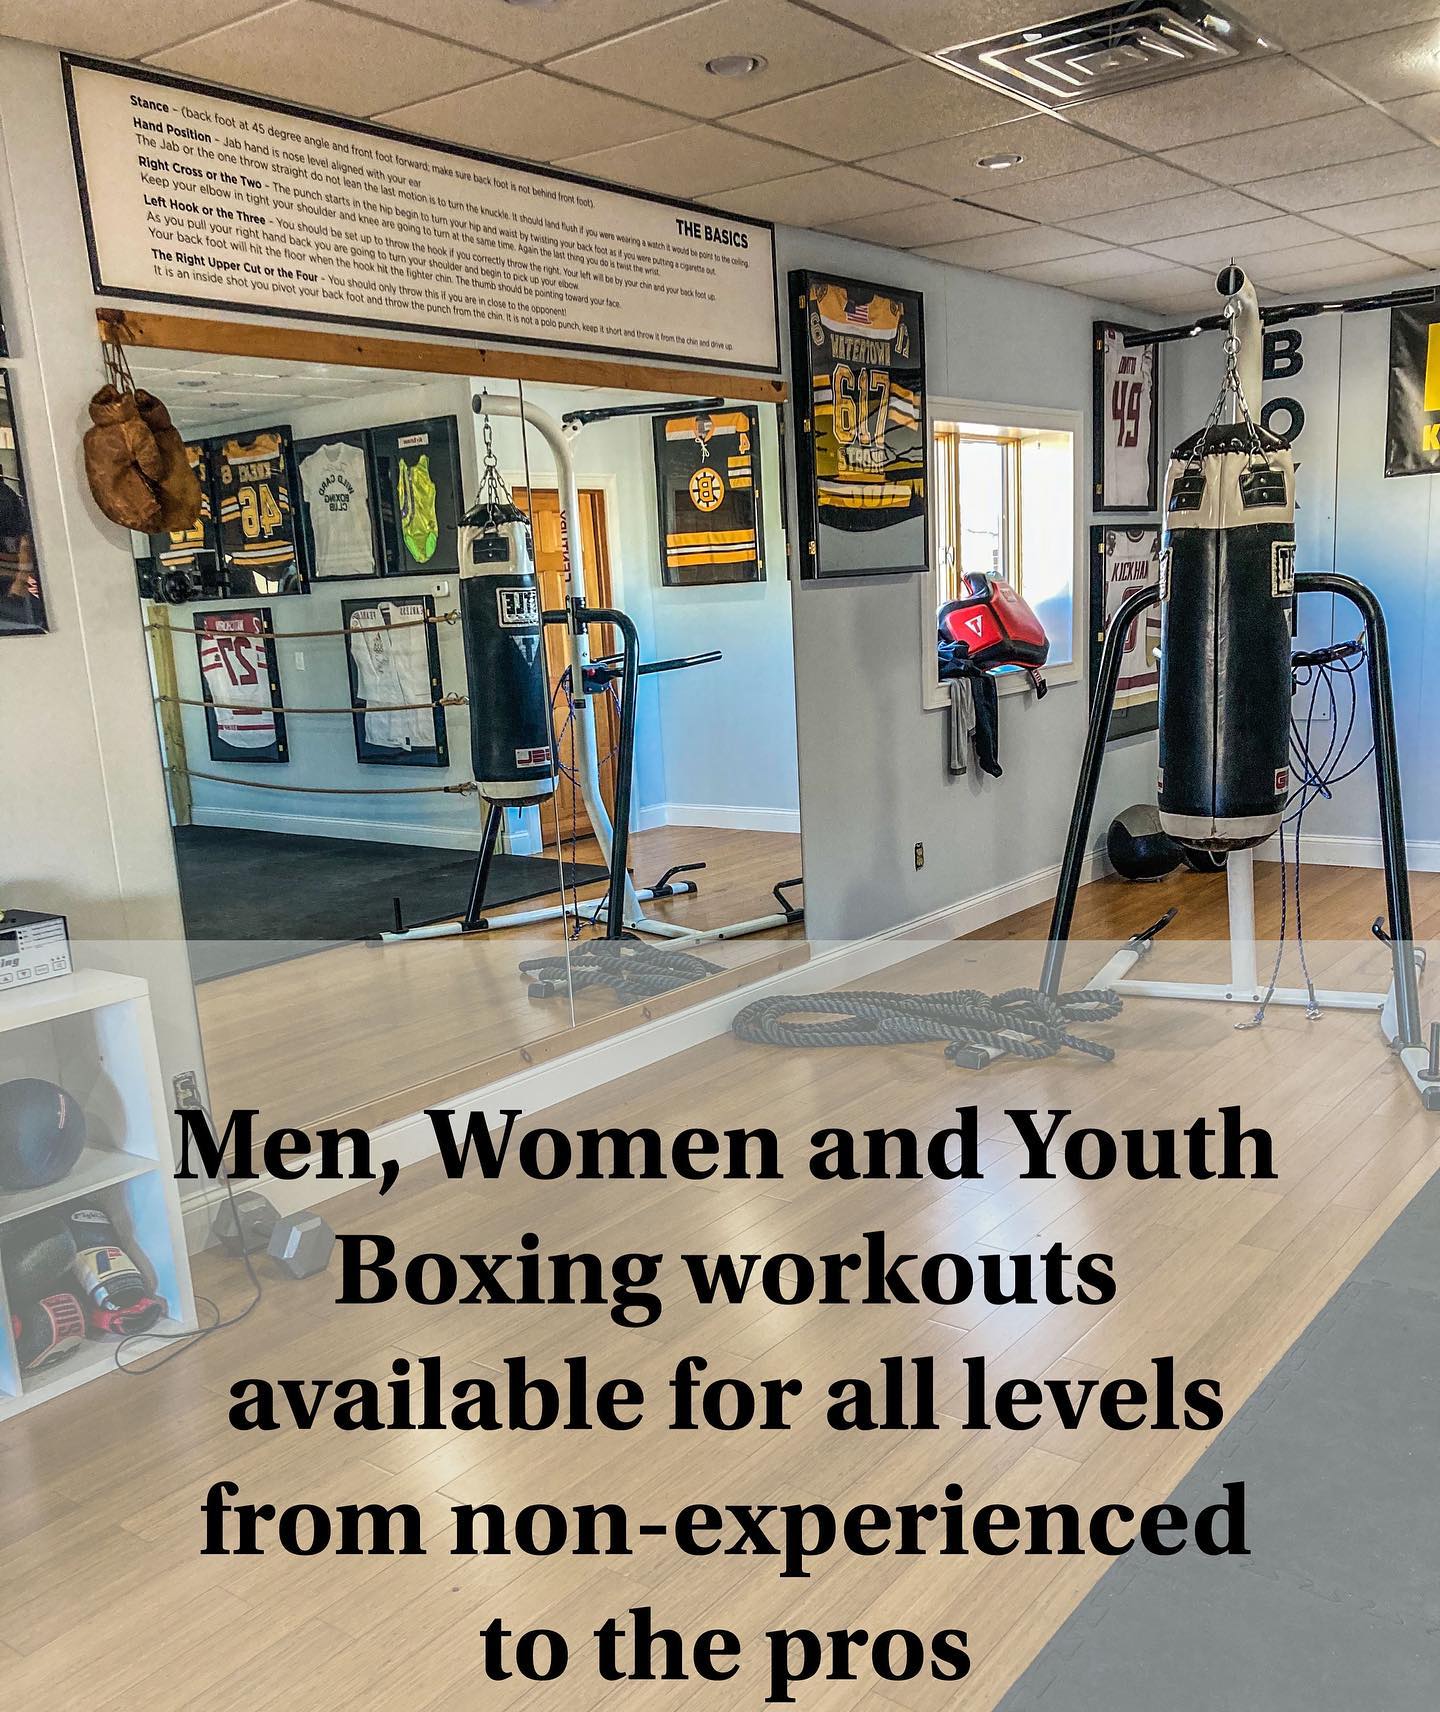 Try a Free Boxing workout today located near Legacy Place , Dedham Ma at www.FitboxDedham.com 
.